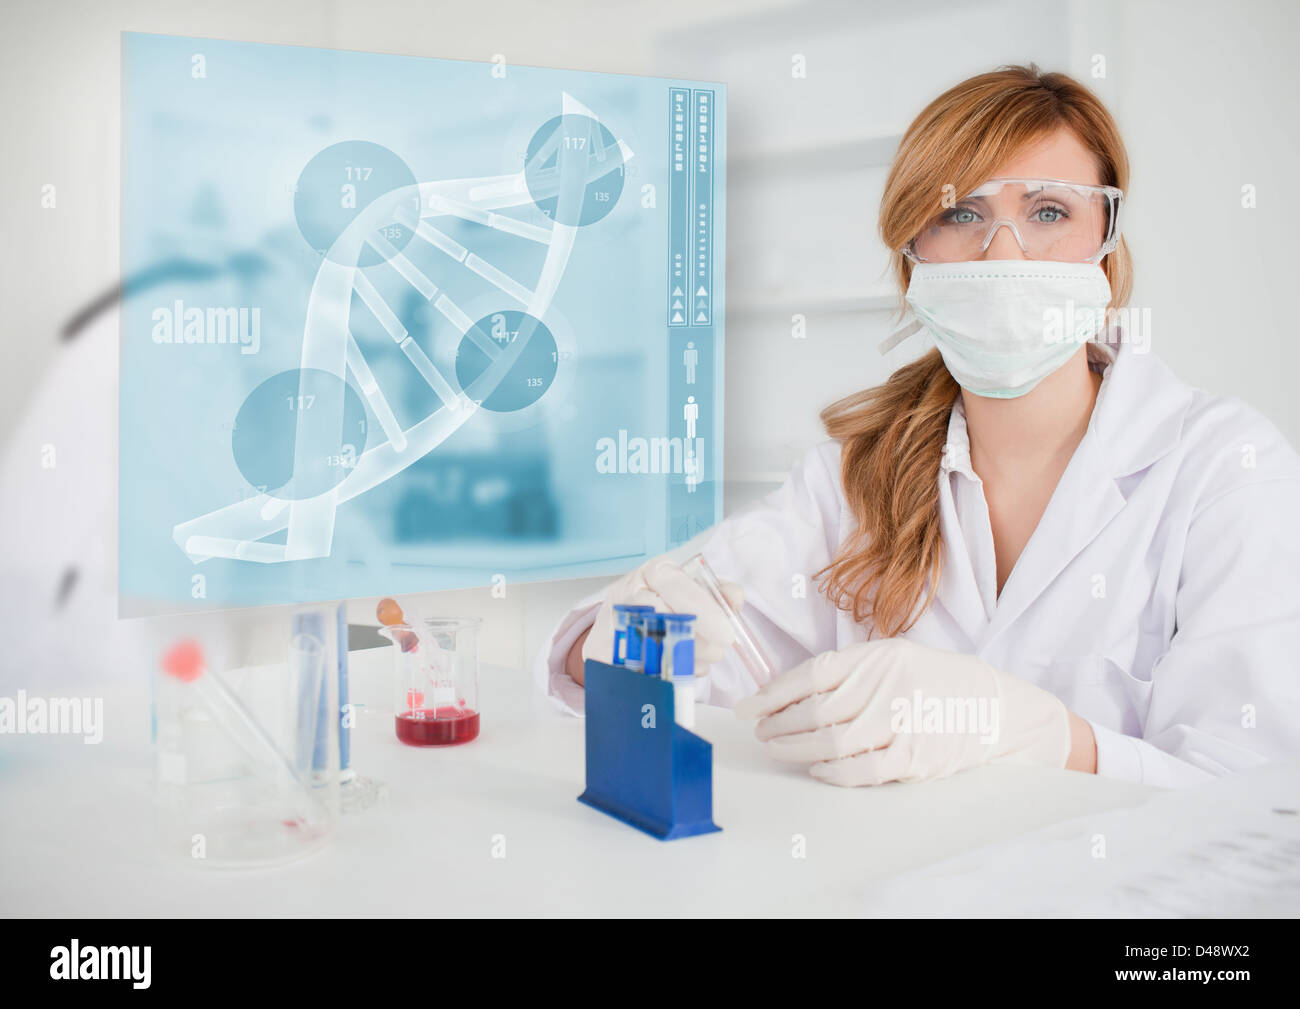 Chemist working in the lab with futuristic interface Stock Photo